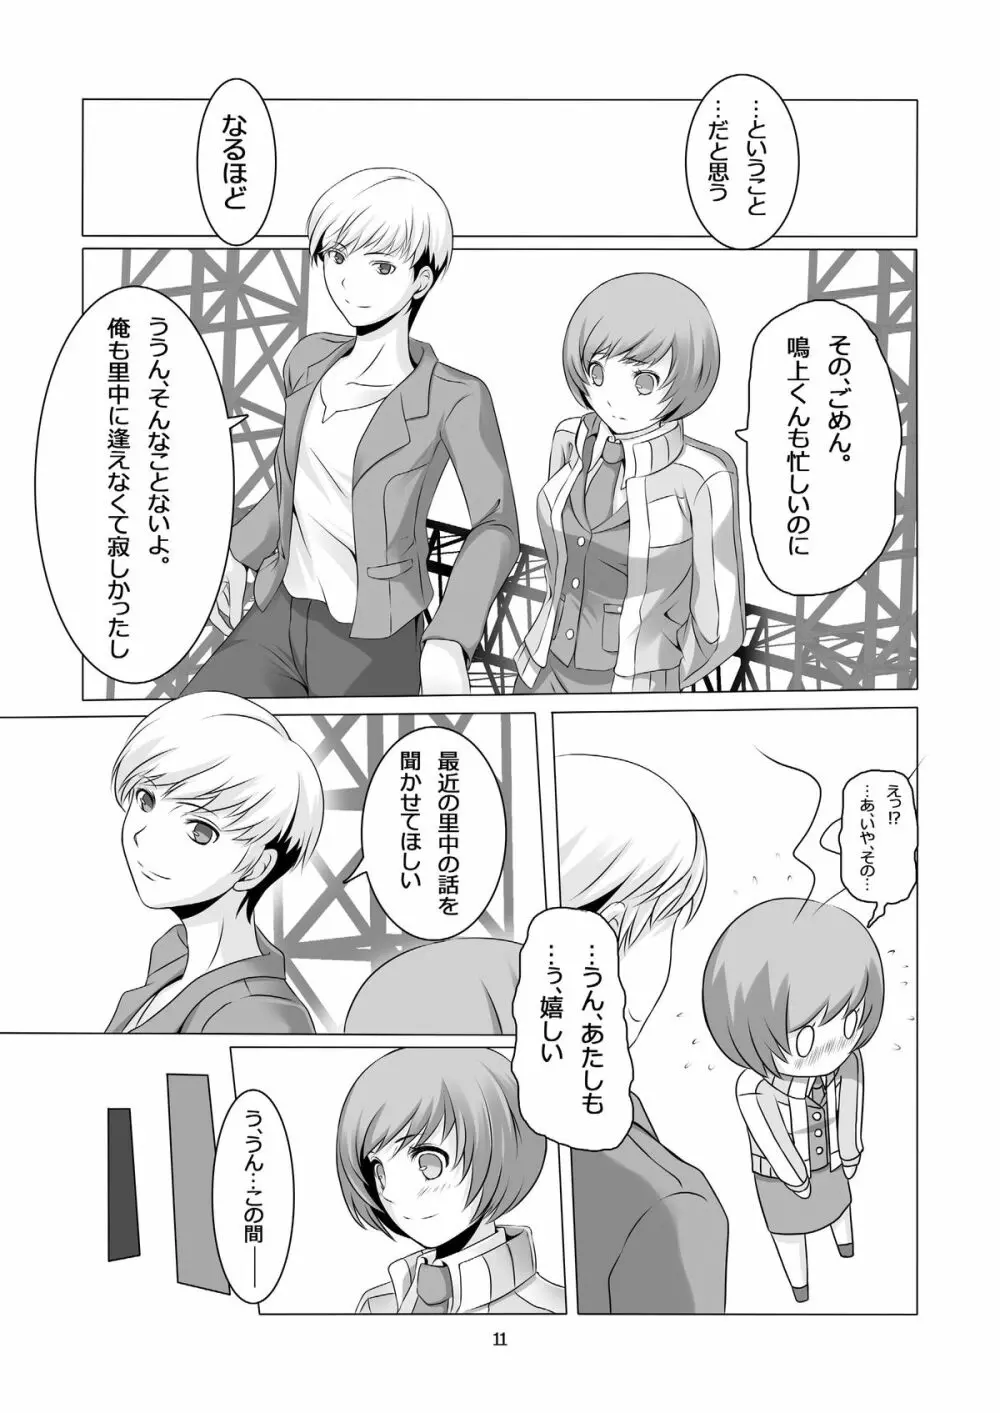 Persona 4: The Doujin #2 Page.13